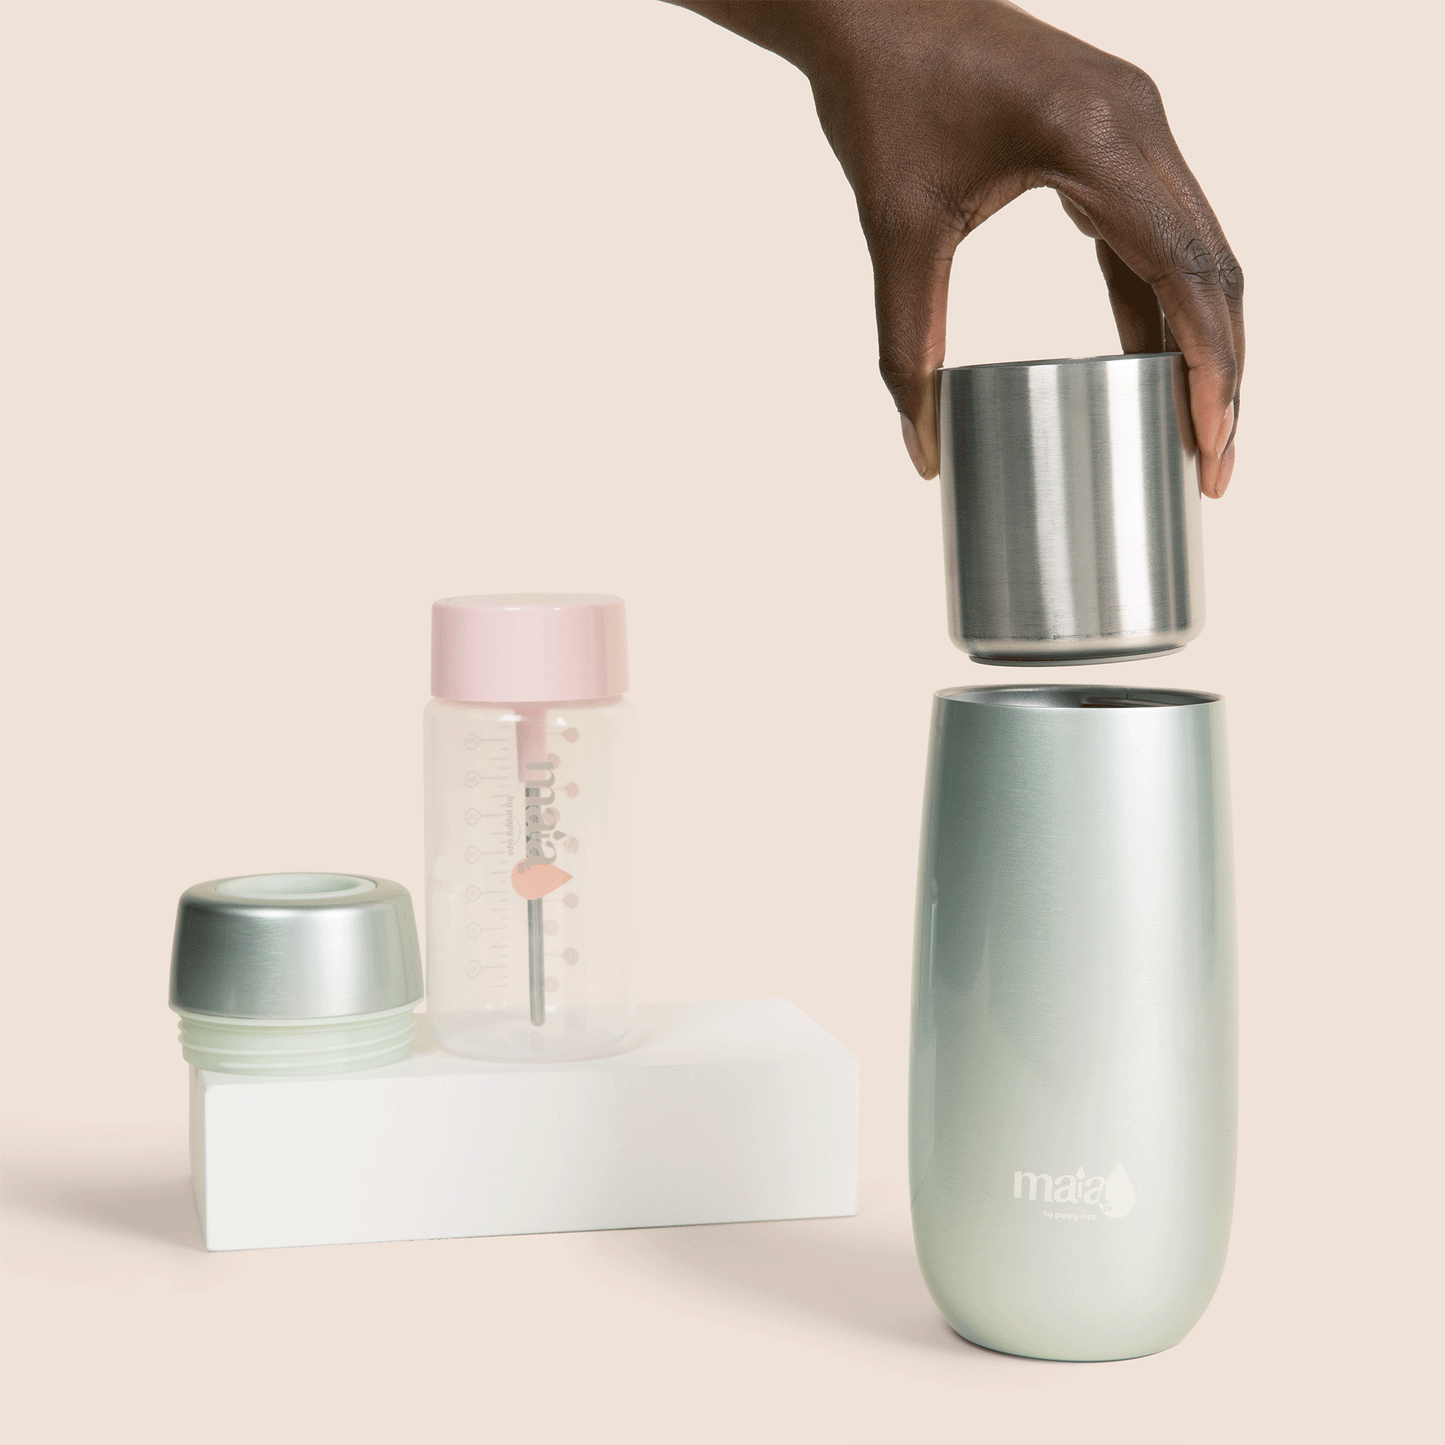 Maia® – Pippy Sips